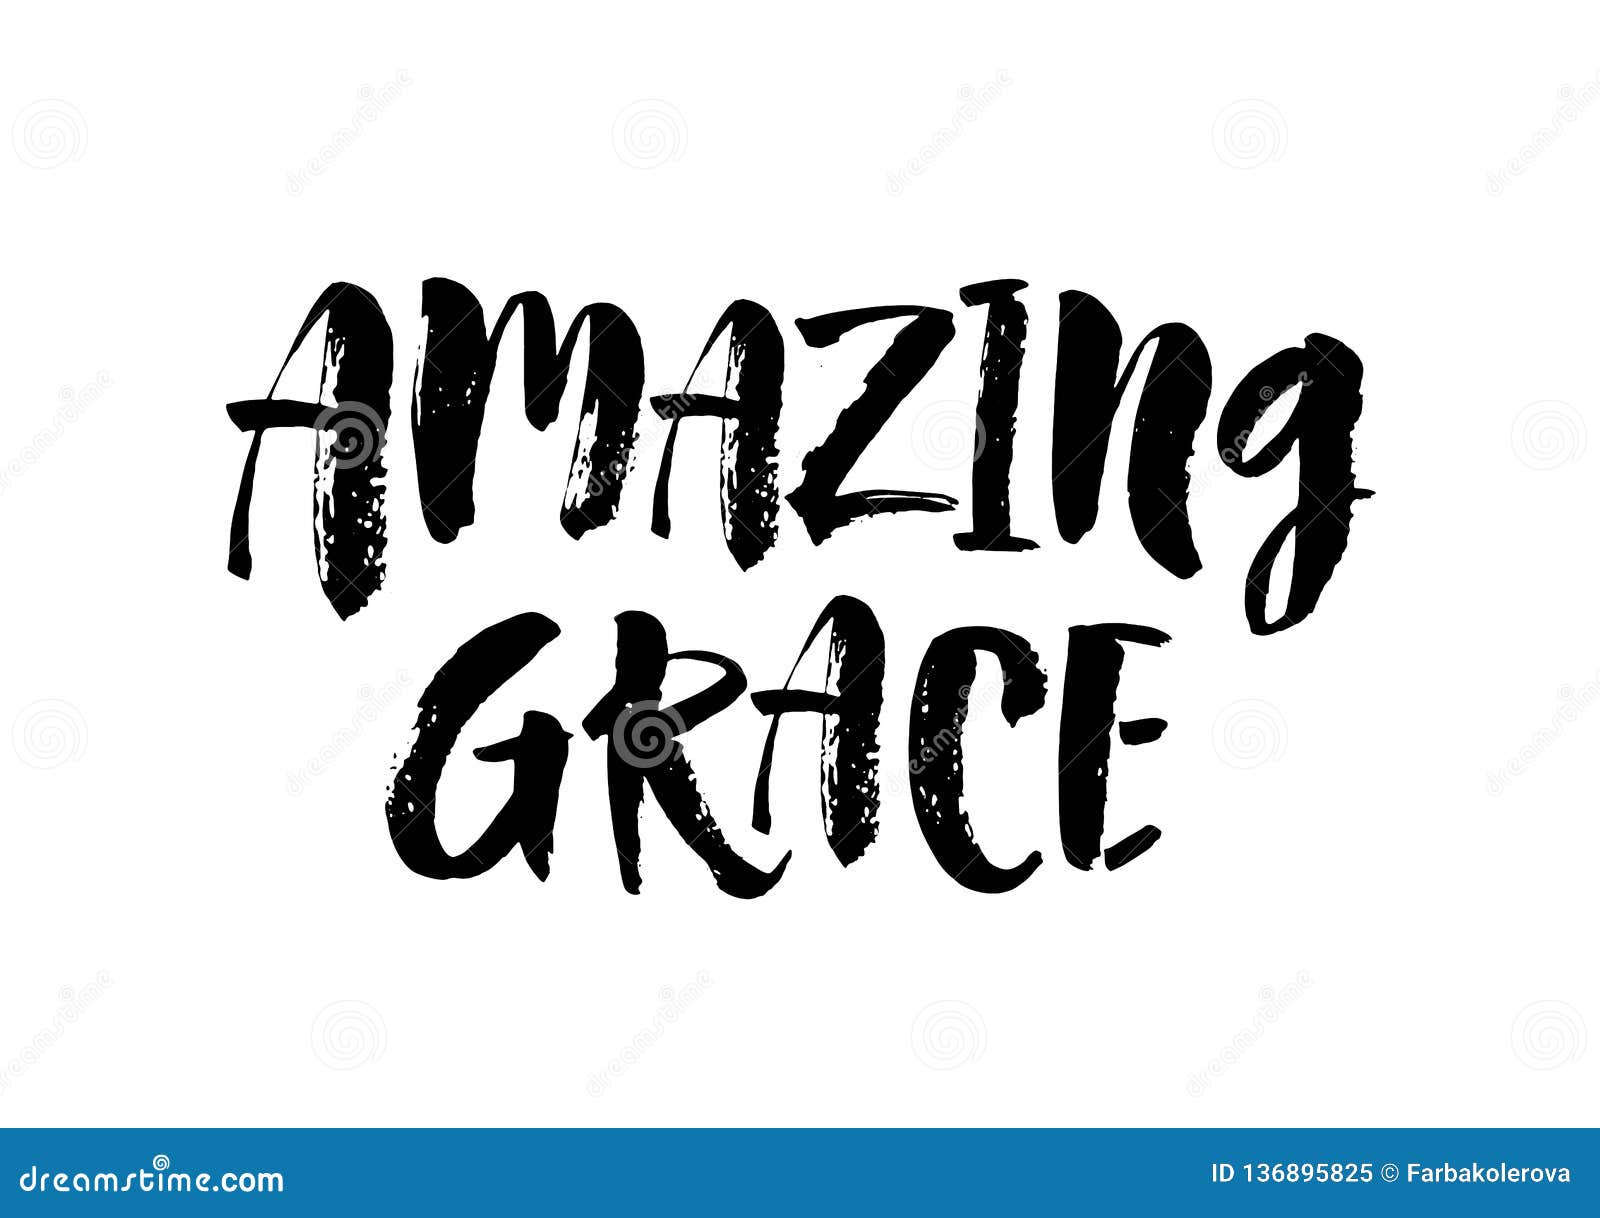 amazing grace. inspirational and motivational quotes. hand painted brush lettering and custom typography for your